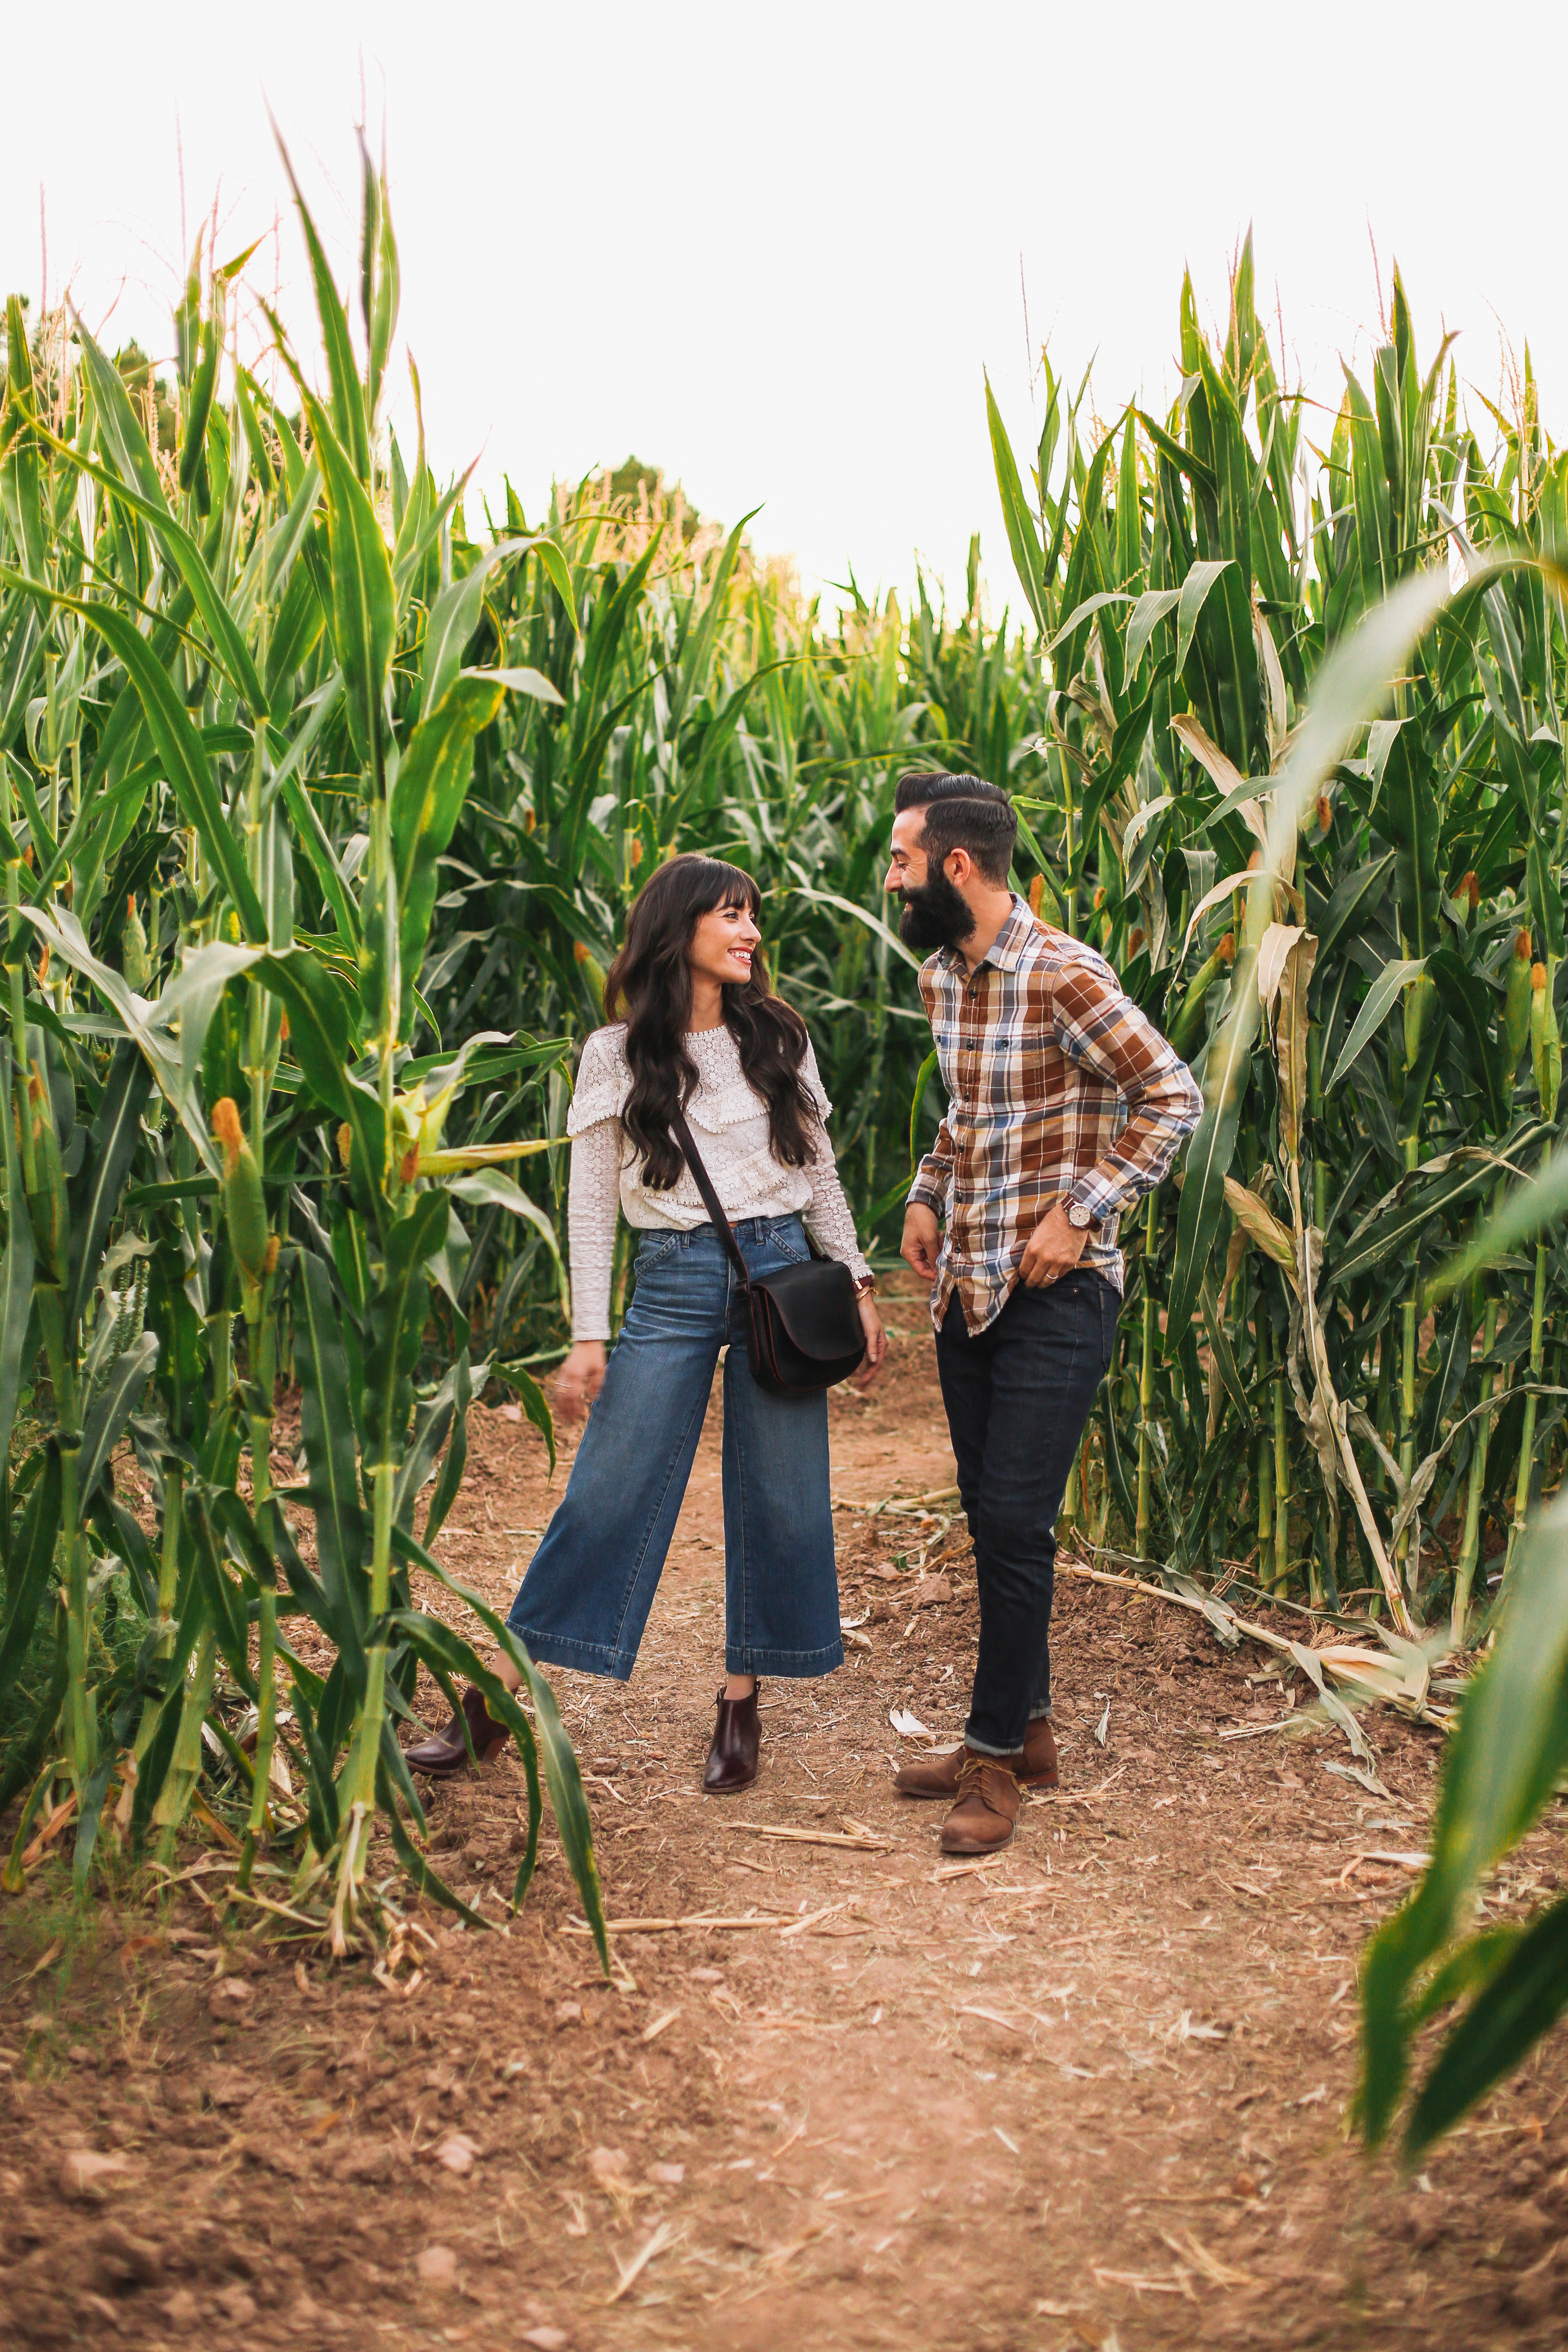 Fall Traditions Pumpkin Picking Couples Outfits